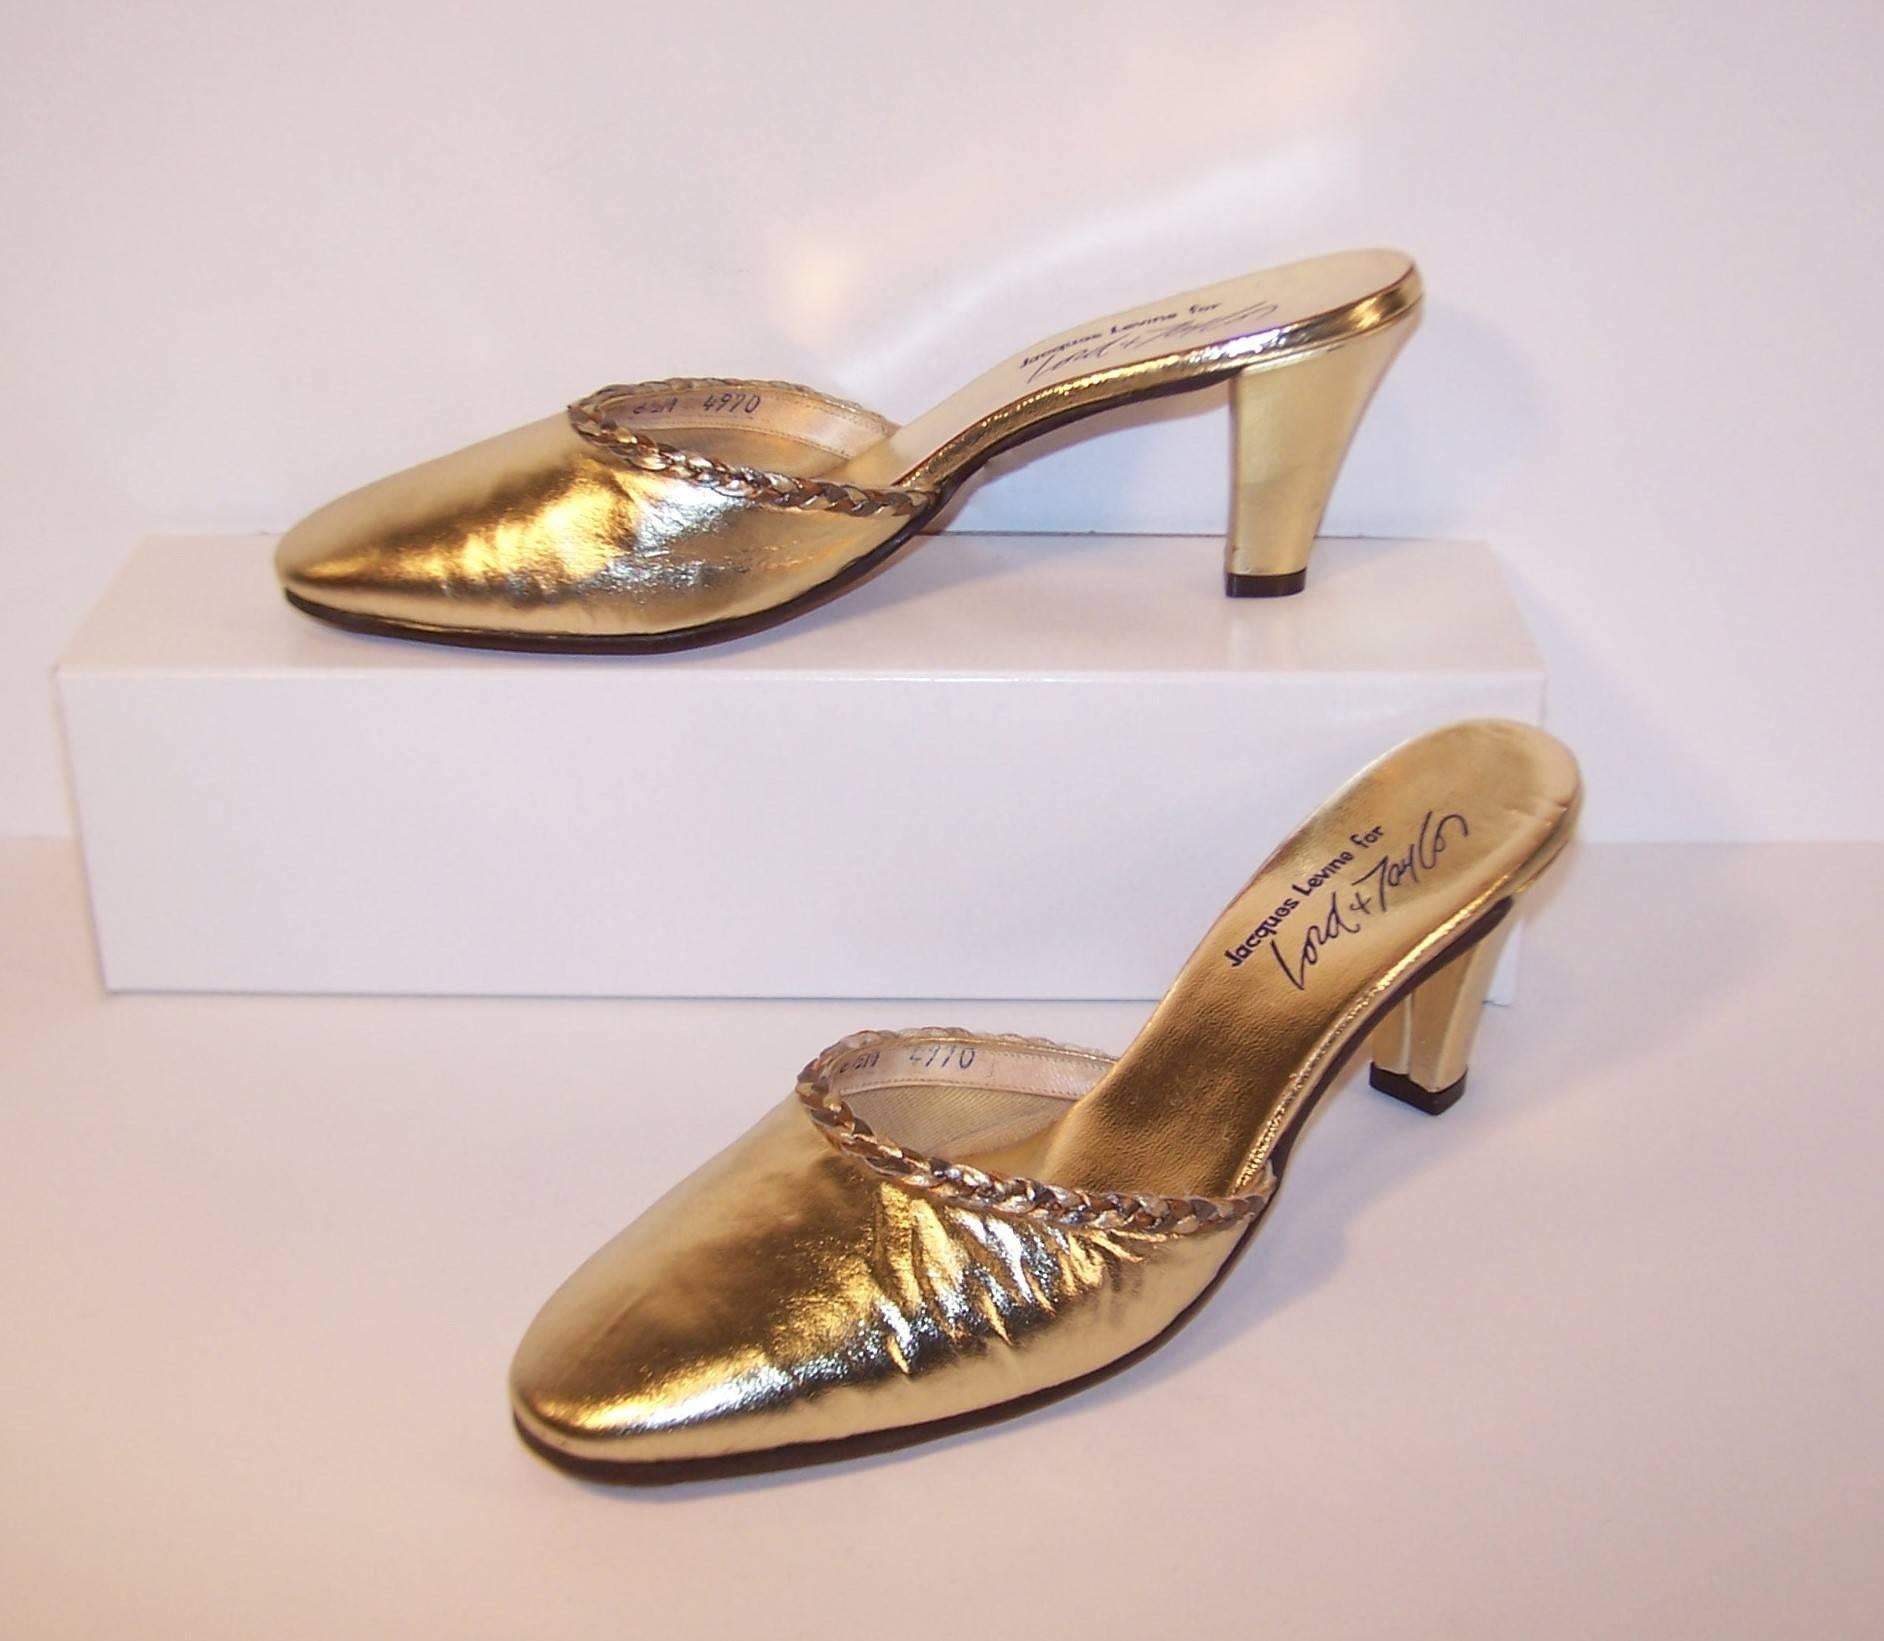 Jacques Levine is best known for producing stylish slippers that are the perfect accessory for glamorous hostess wear.  These gold leather mules can perform double duty as slippers and evening shoes.  The simple style is embellished with gold and